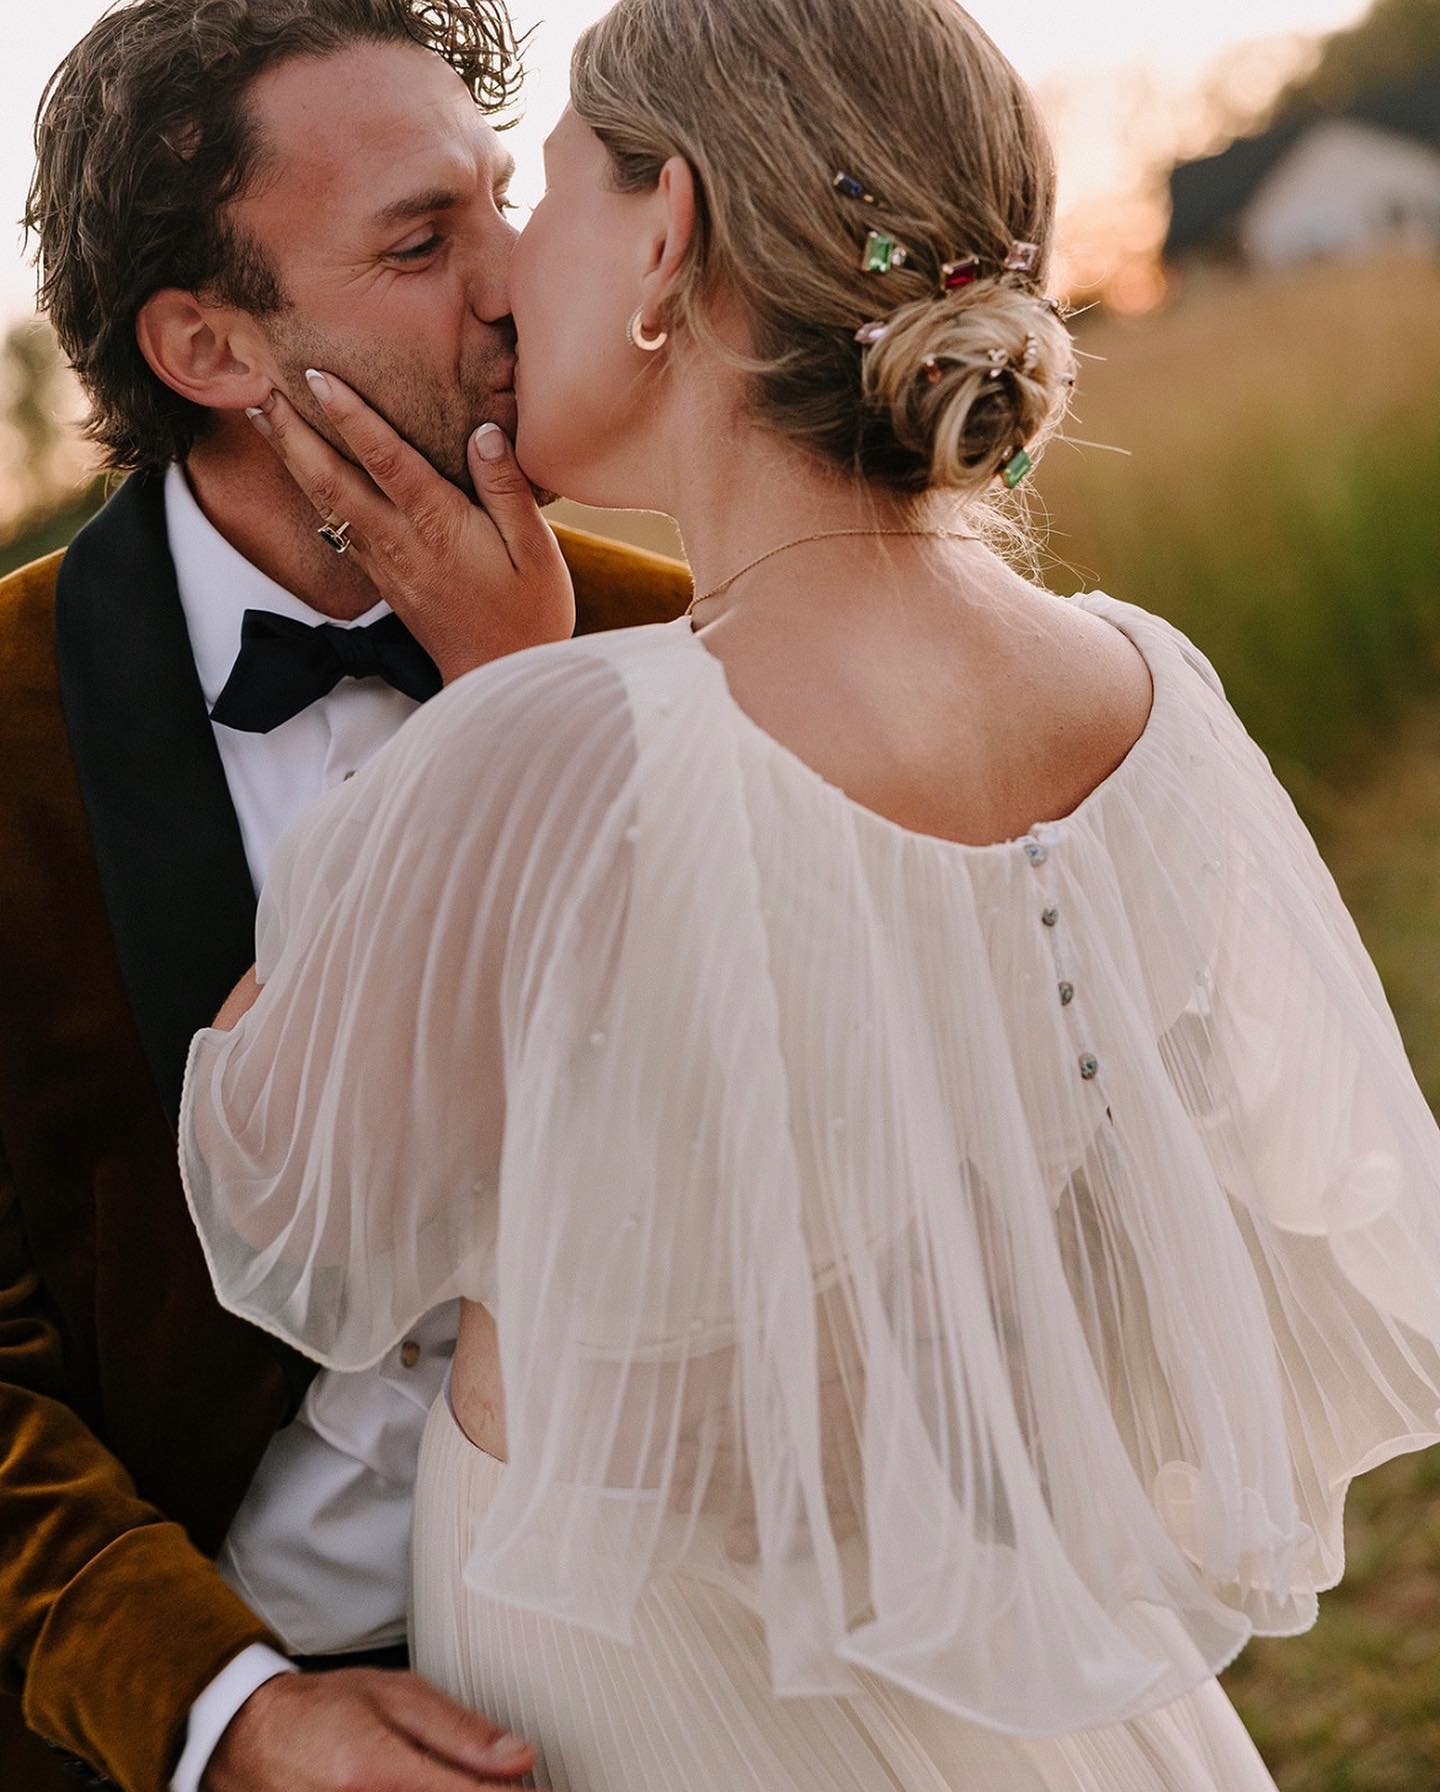 A moment for this dress and that smooch. ✨

Captured by @natalienicolephoto of @callie.enea and Chris at @mableandjack last summer.